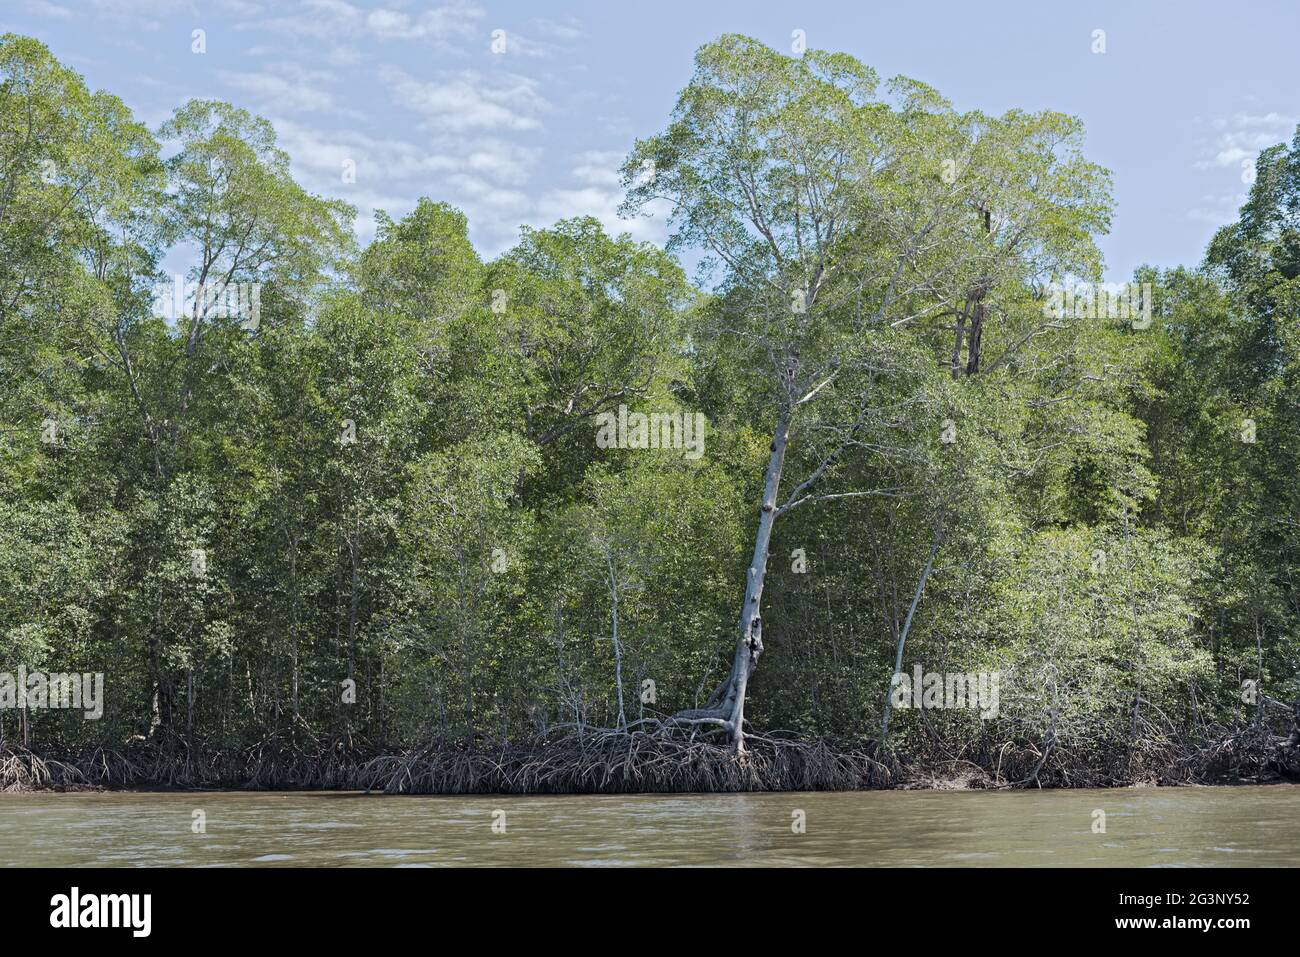 Mangrove forest on the shores of the Bahia de los Muertos at the mouth of the Rio Platanal Panama Stock Photo